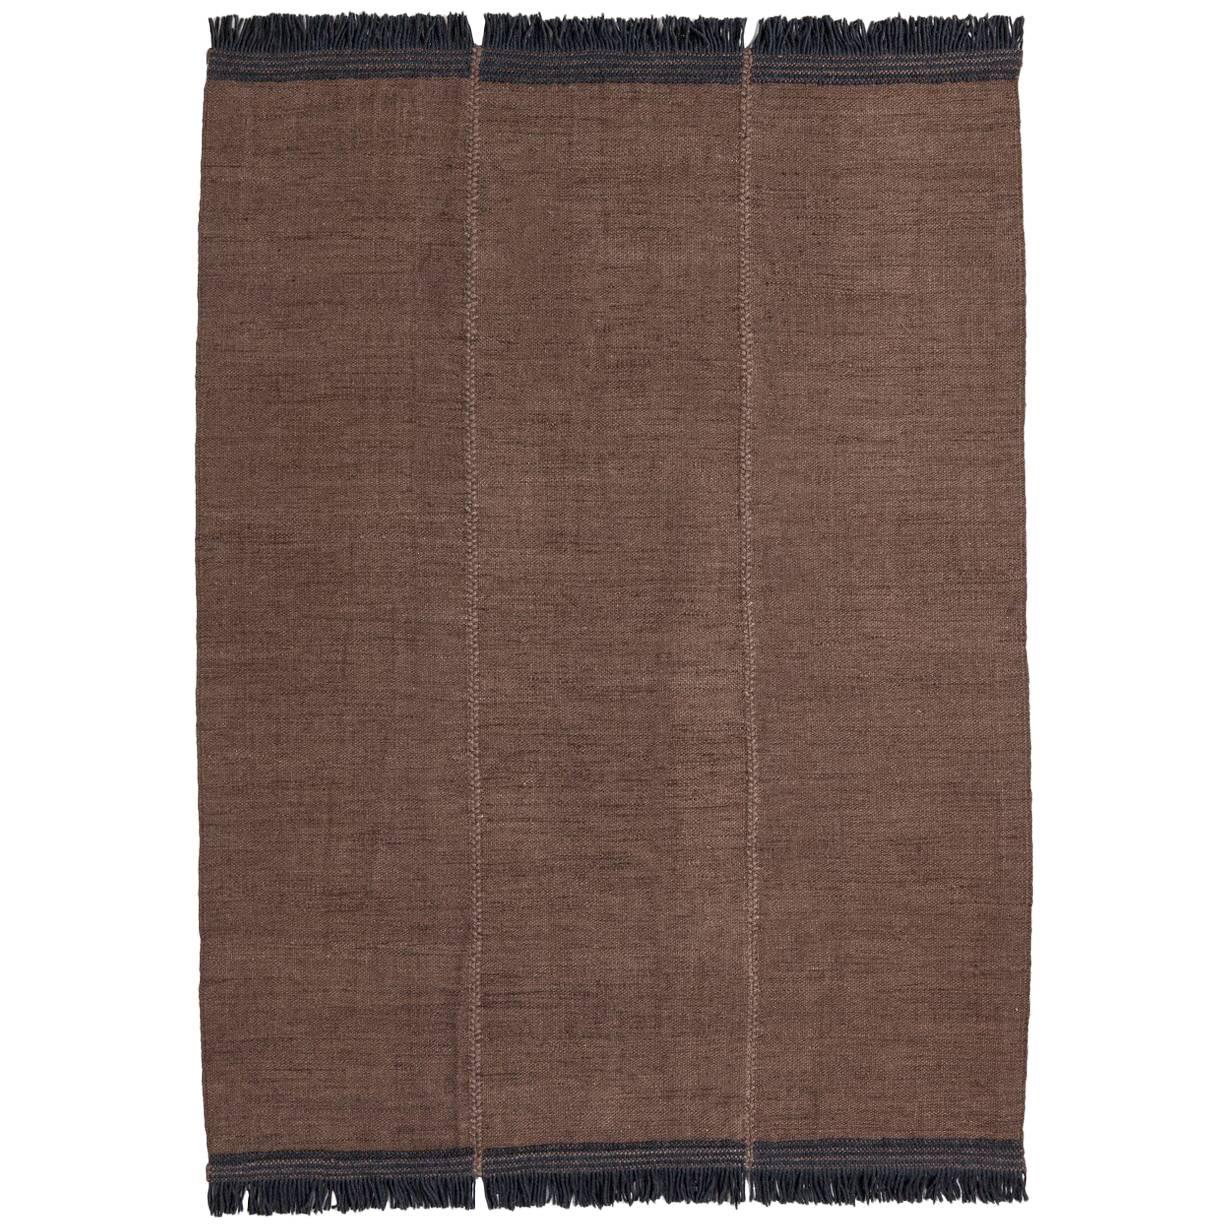 Mia Large Brown Hand-Loomed Wool Dhurrie Rug by Nani Marquina, Medium For Sale